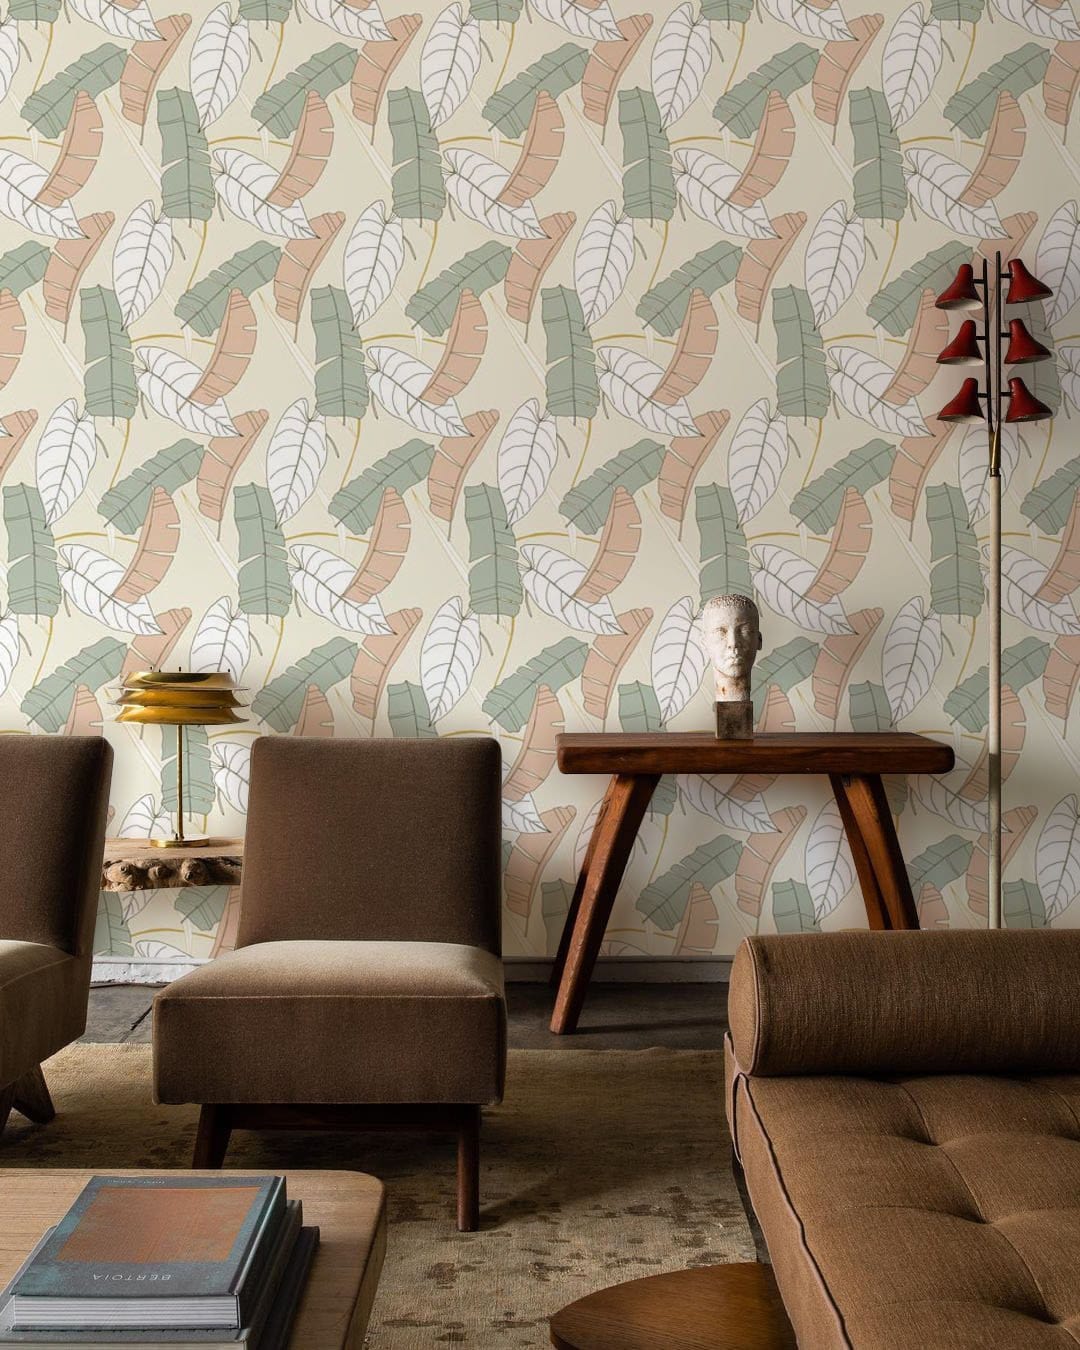 Wallpaper mural featuring a pastel banana leaf design for the living room decor